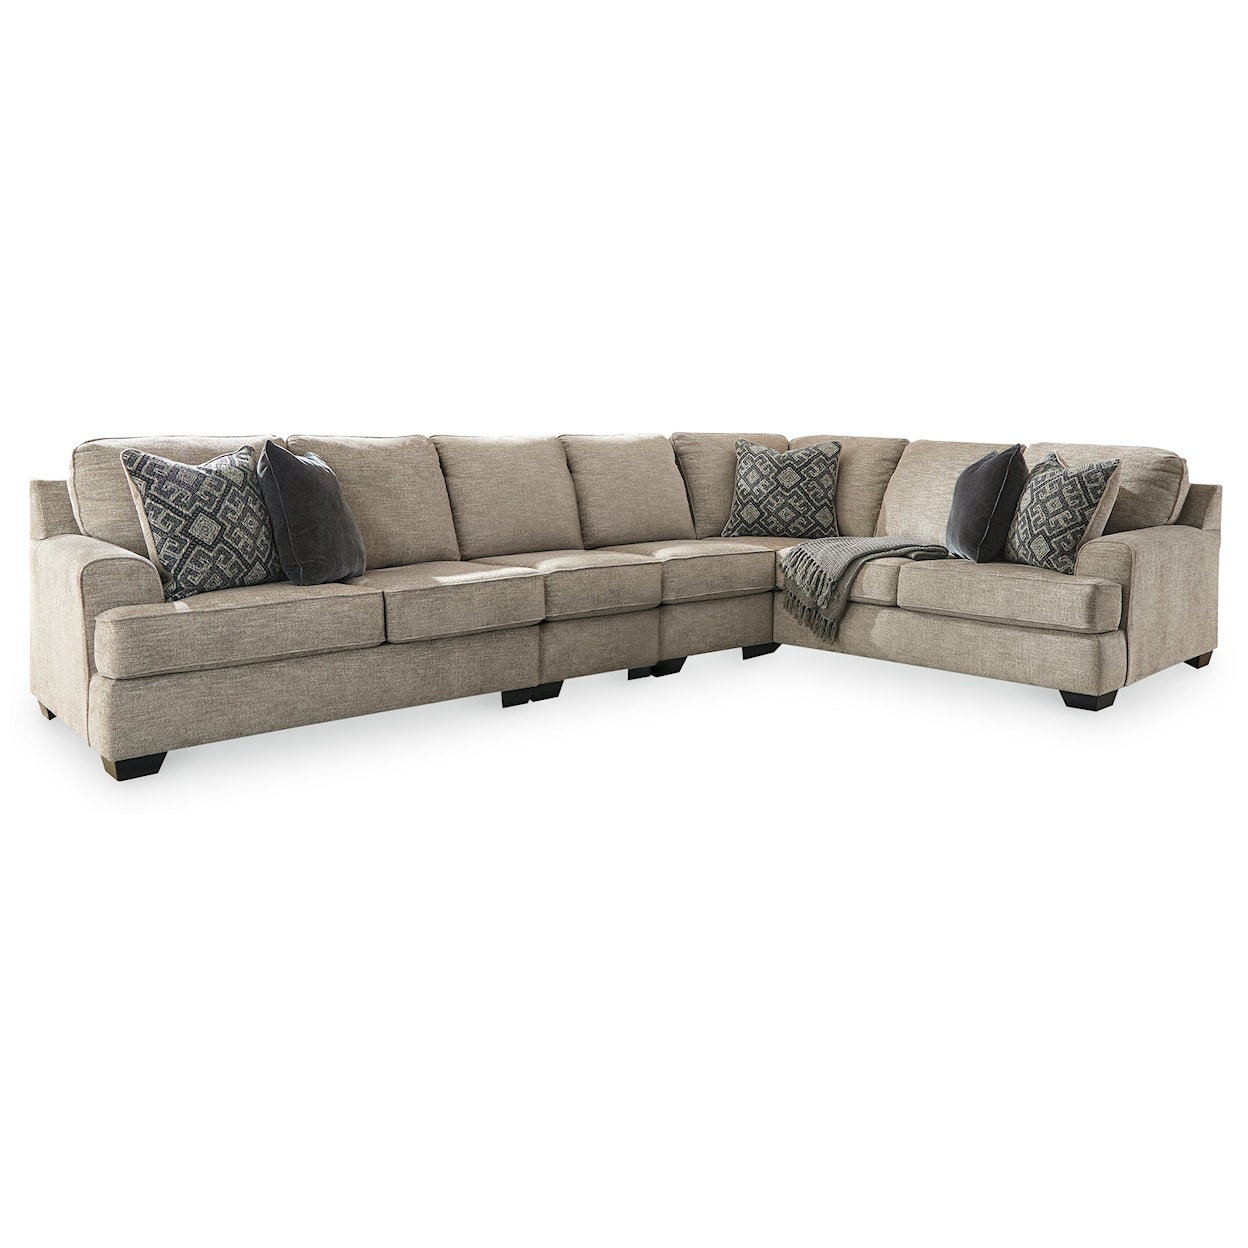 Benchcraft Bovarian 4-Piece Sectional